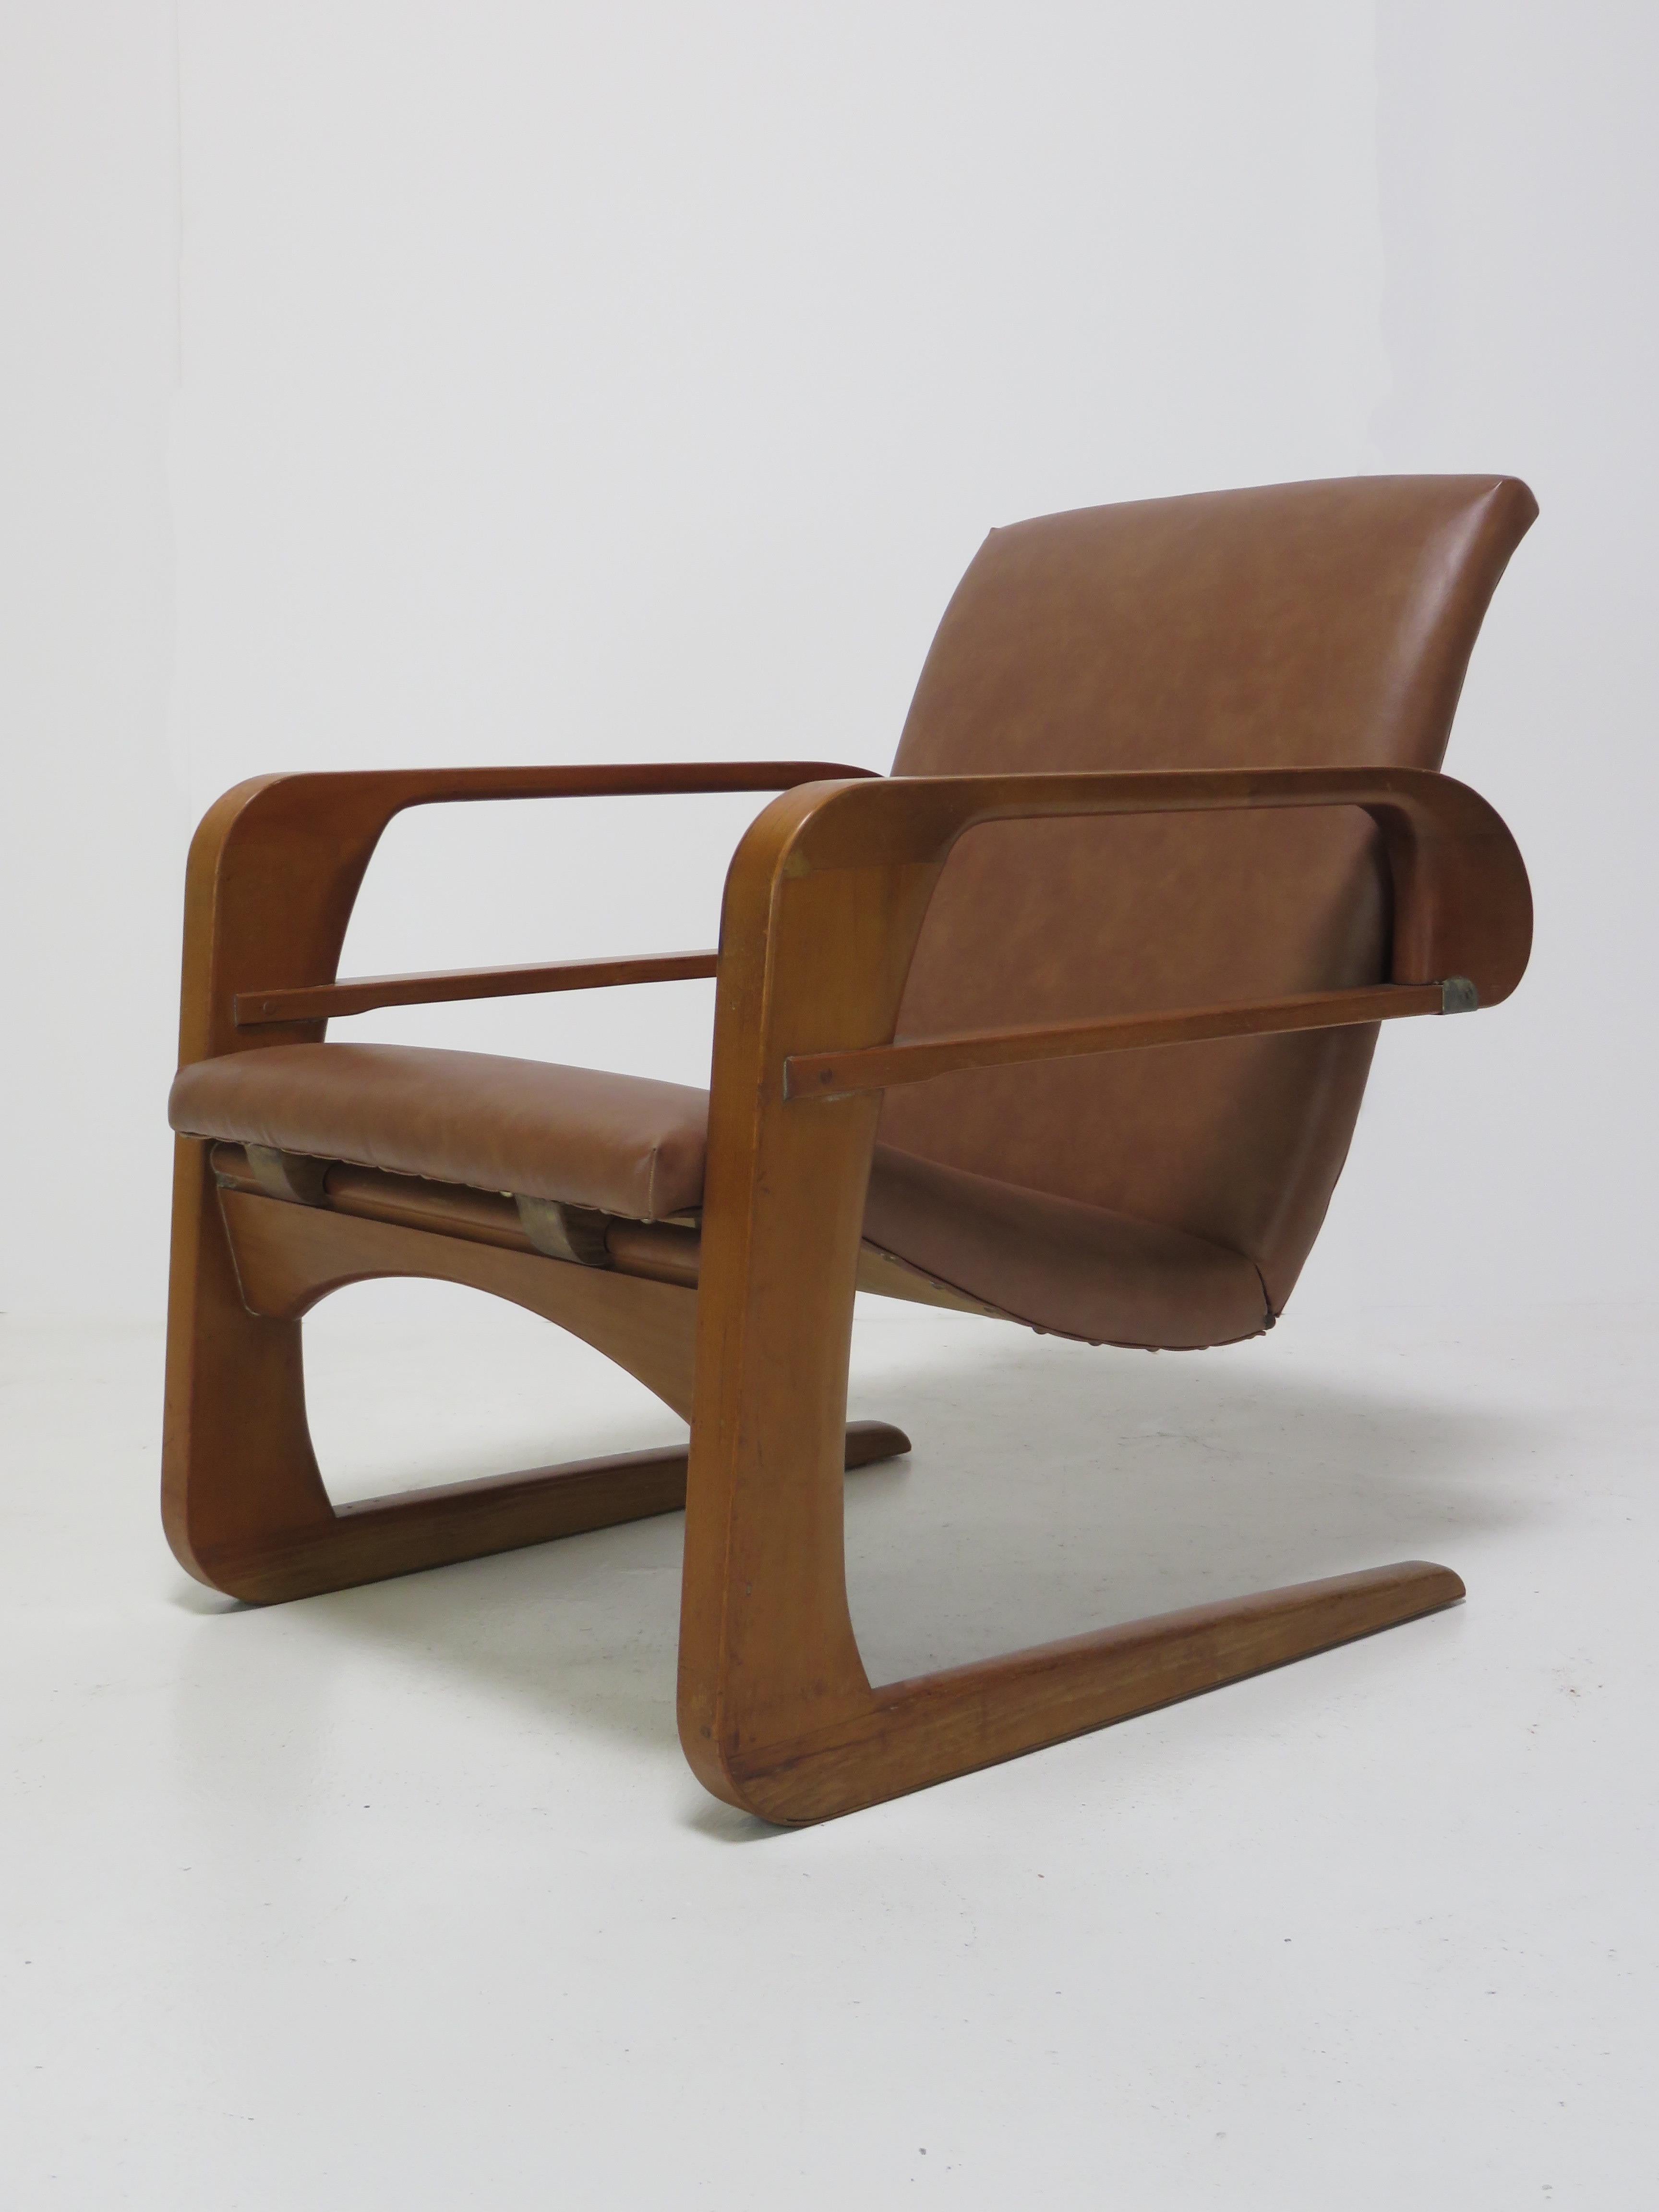 American KEM Weber Airline Chairs For Sale